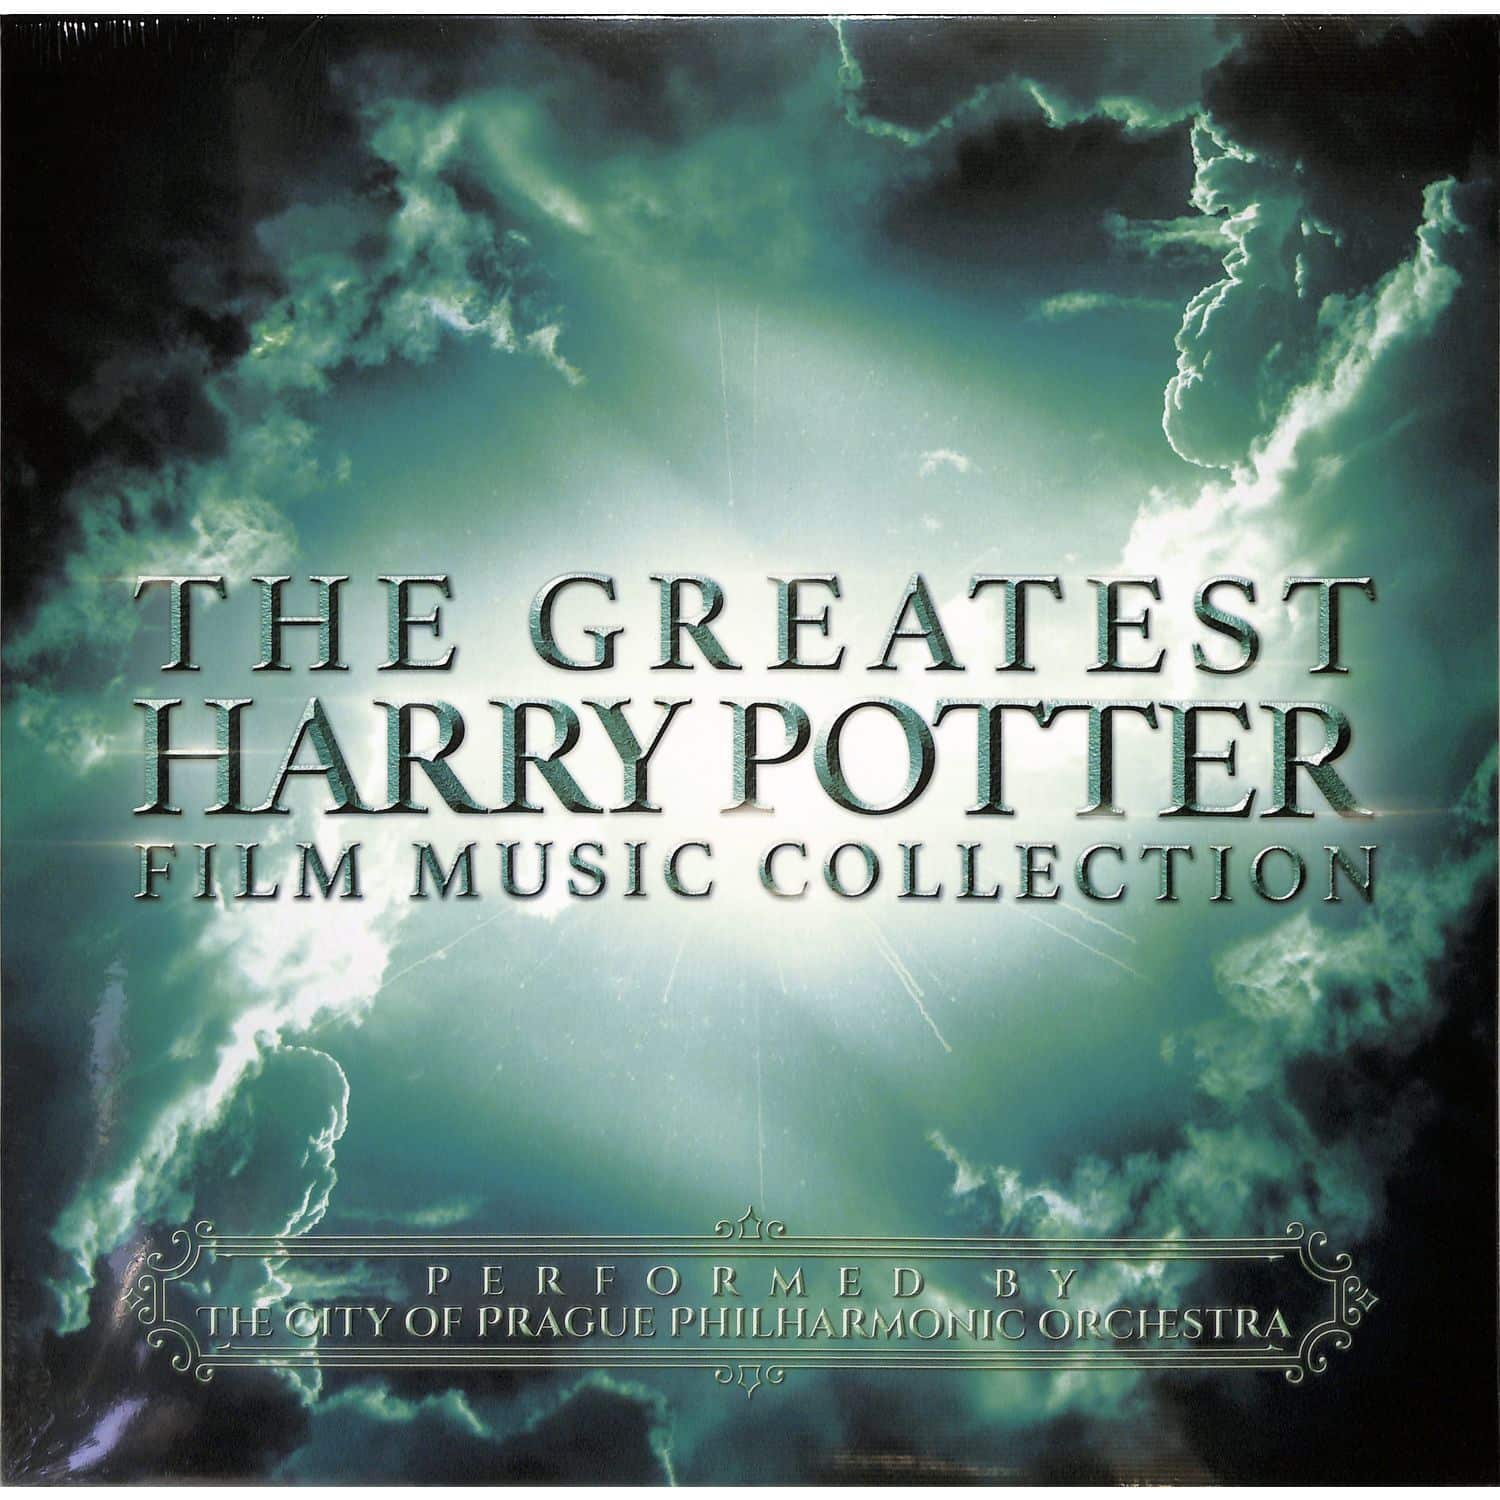 The City Of Prague Philharmonic Orchestra - THE GREATEST HARRY POTTER FILM MUSIC COLLECTION 